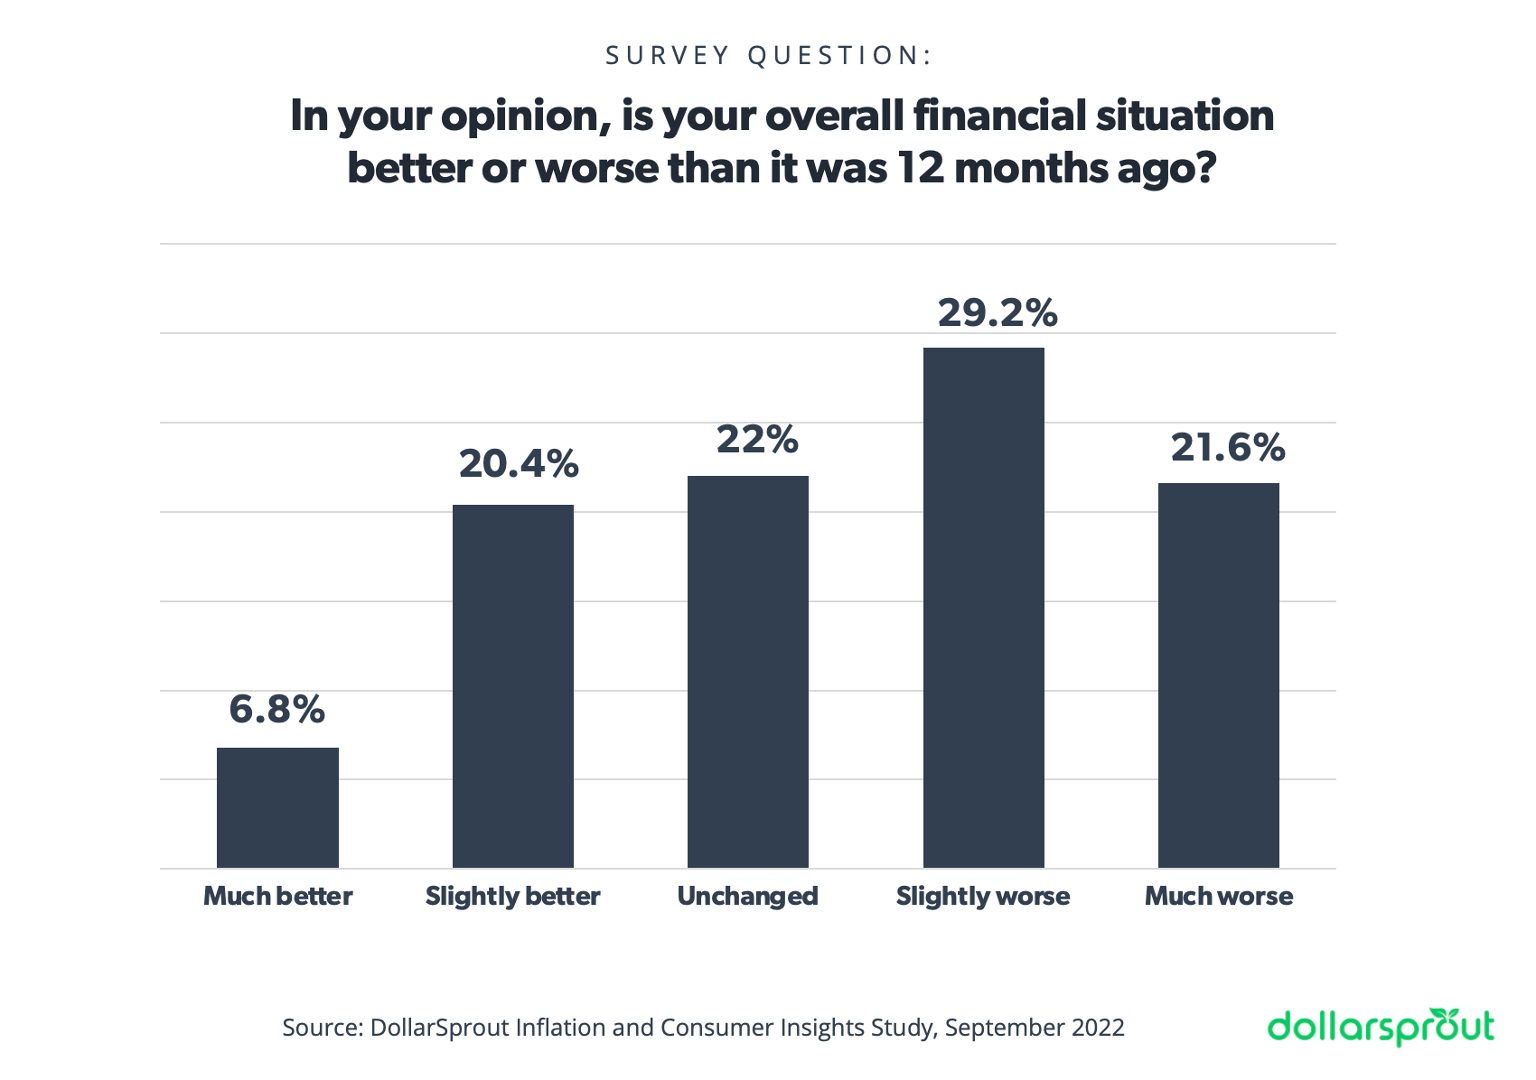 Is your overall financial situation better or worse than it was 12 months ago? Only 26% said it was better.